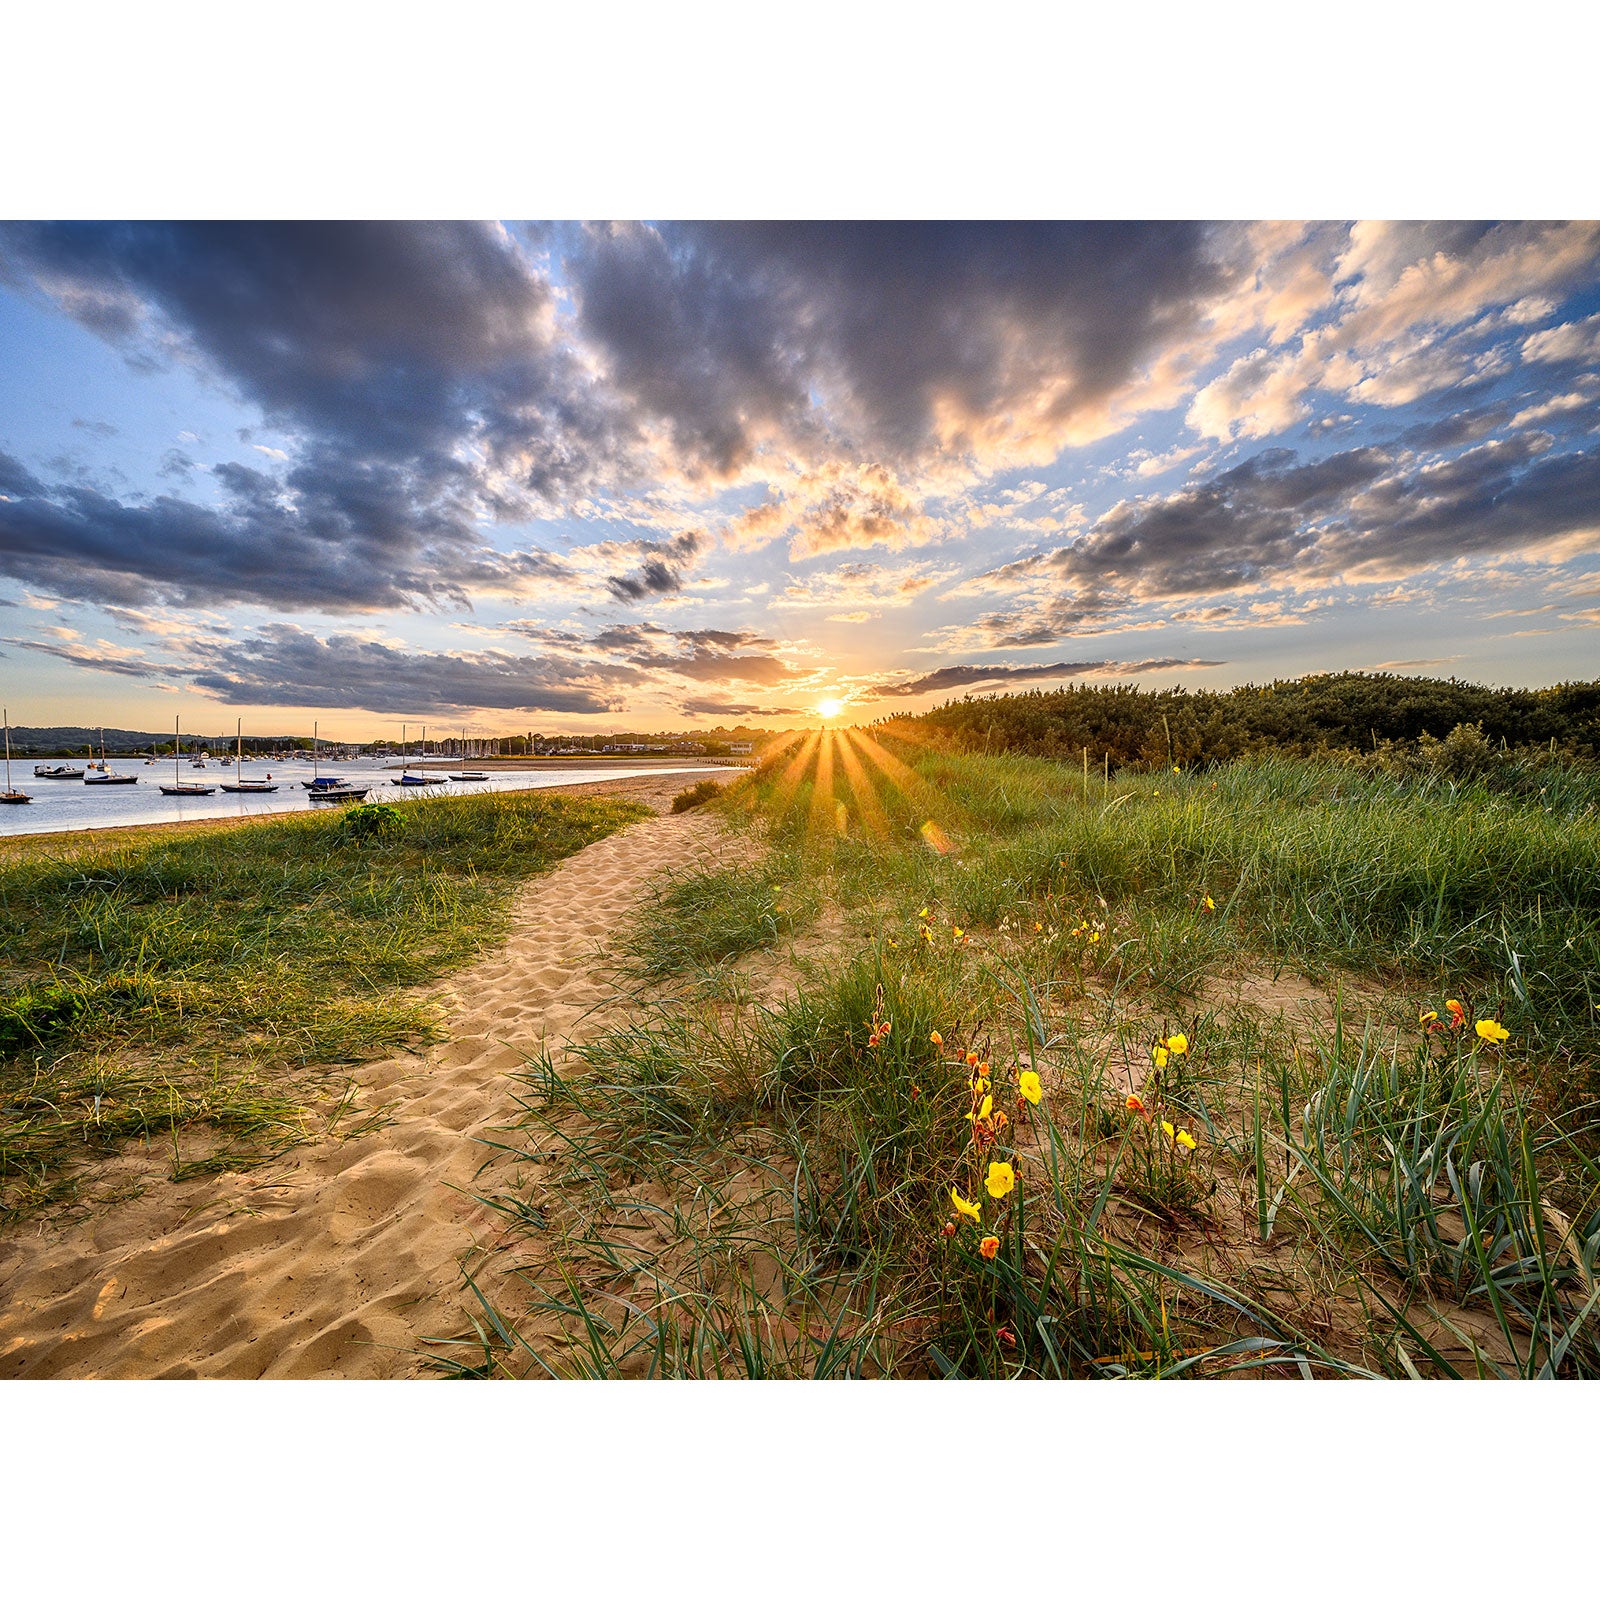 Sunset over a coastal landscape with a sandy path leading towards the water and boats, with wildflowers in the foreground on Bembridge Harbour by Available Light Photography.